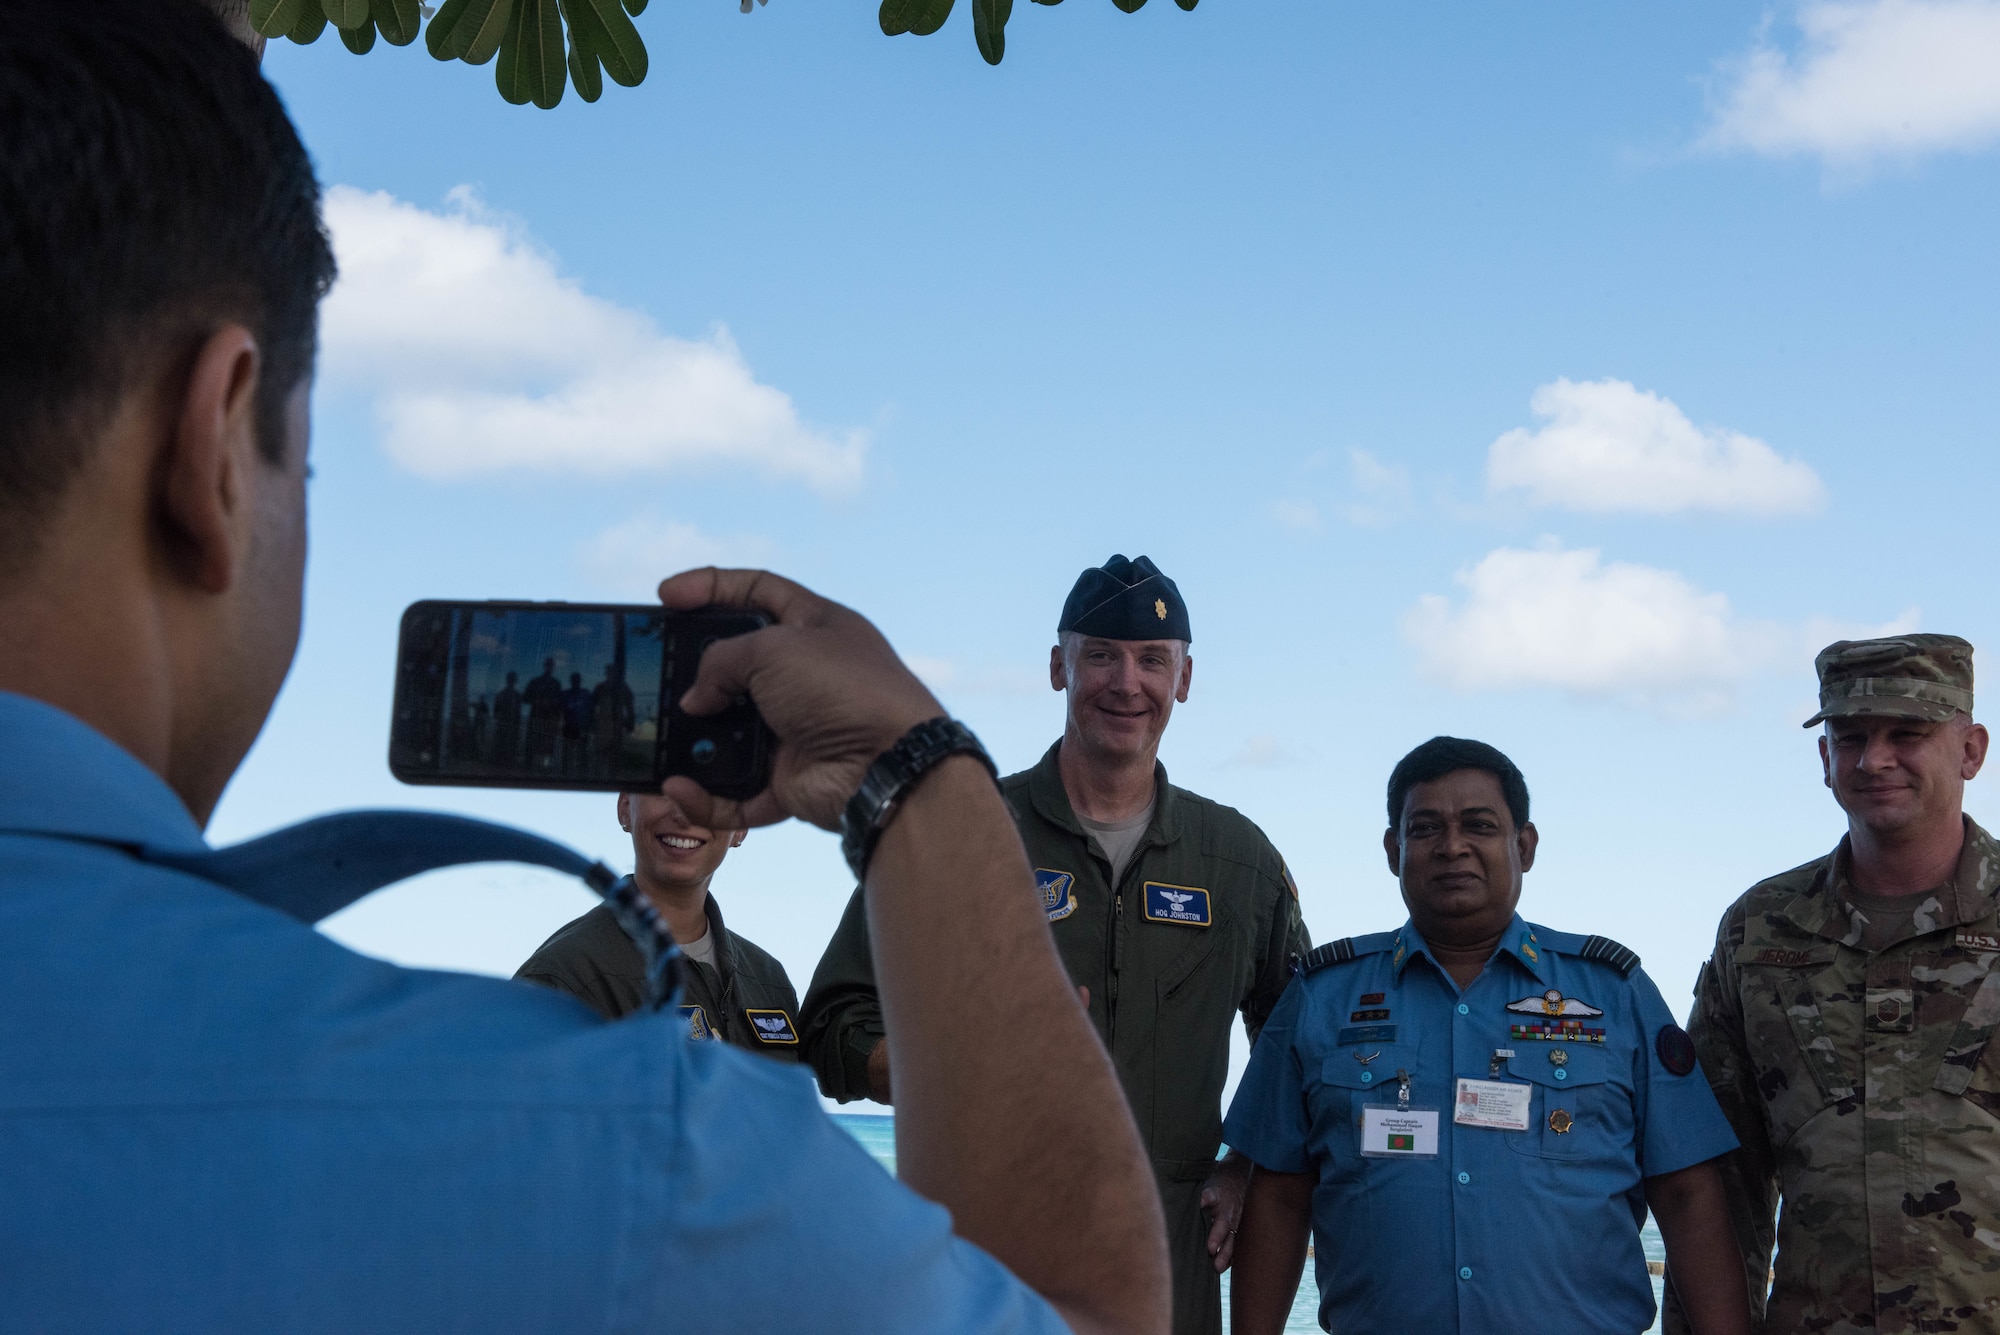 United States Air Force Airmen take a photo with a member from the Bangladesh Air Force during the Indo-Pacific Safety Air Forces Exchange in Waikiki, Hawaii, Aug. 20, 2019.